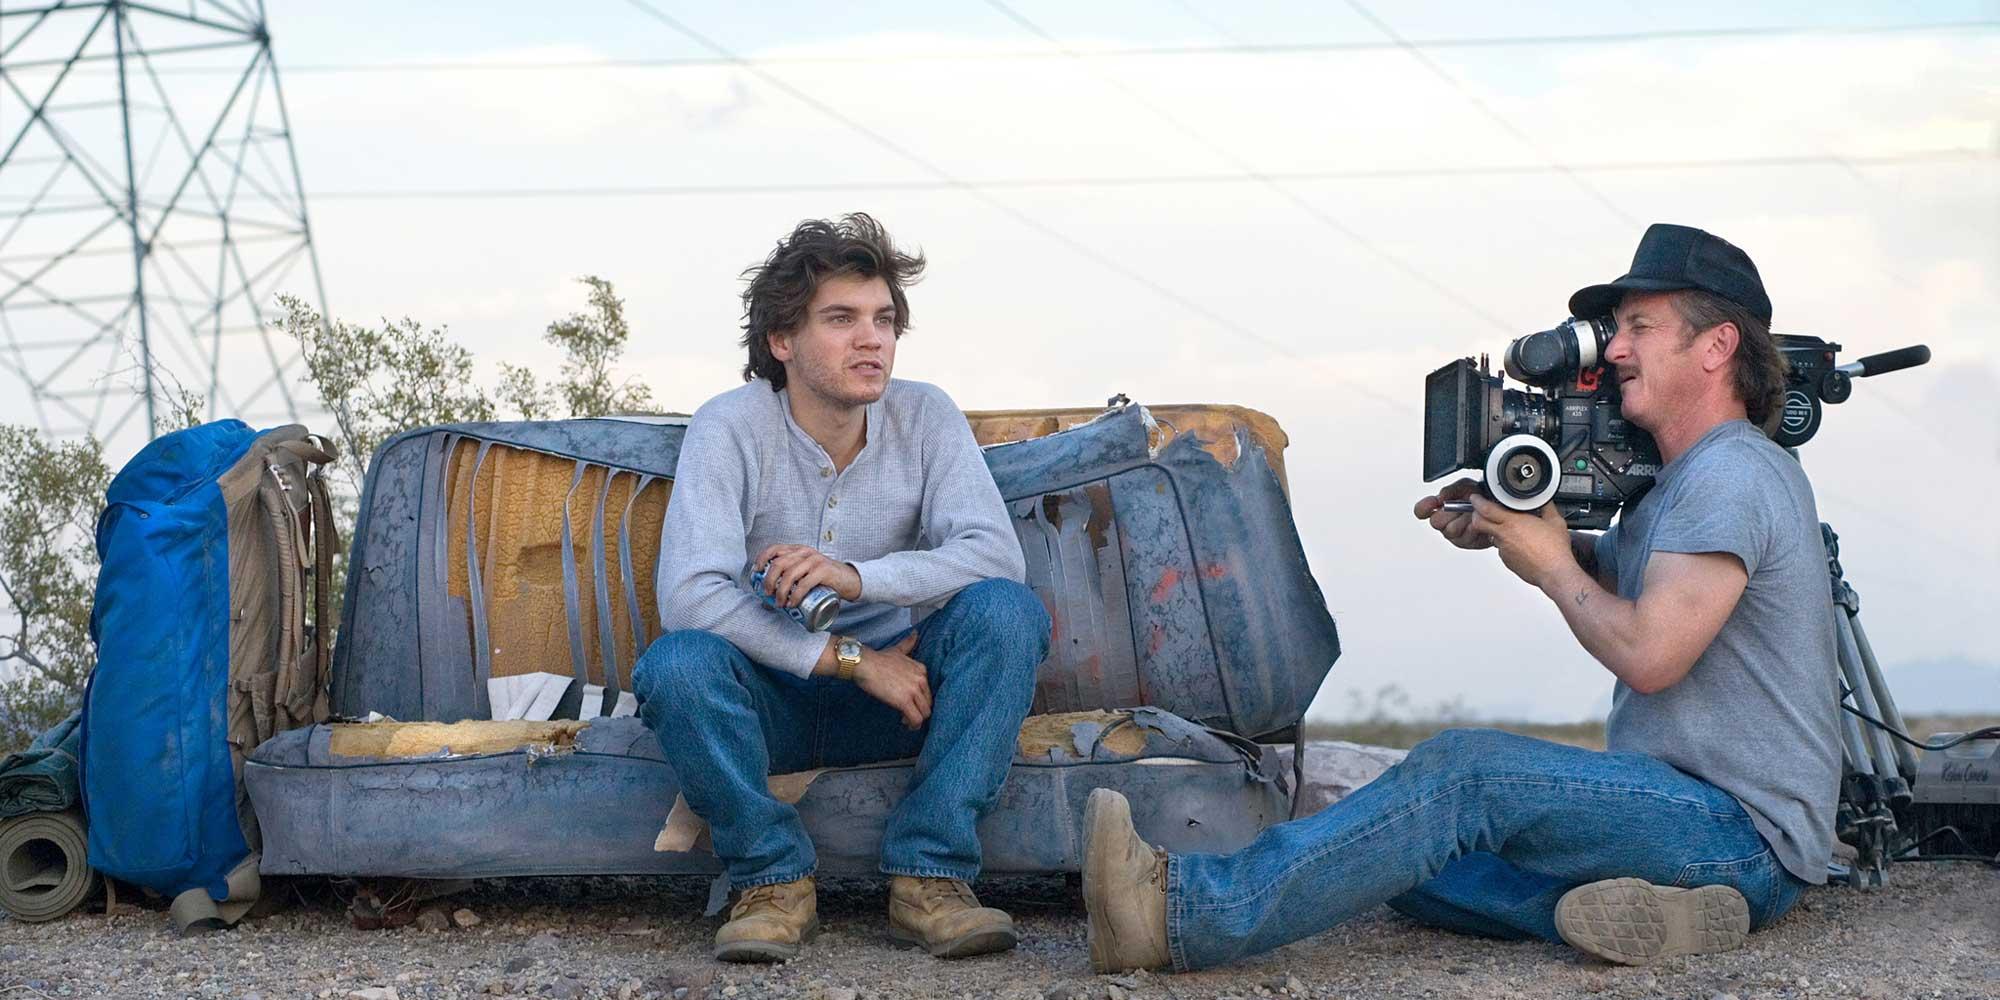 Penn films Emile Hirsch for Into the Wild. © paramount pictures 2020, from into the wild, now on on digital